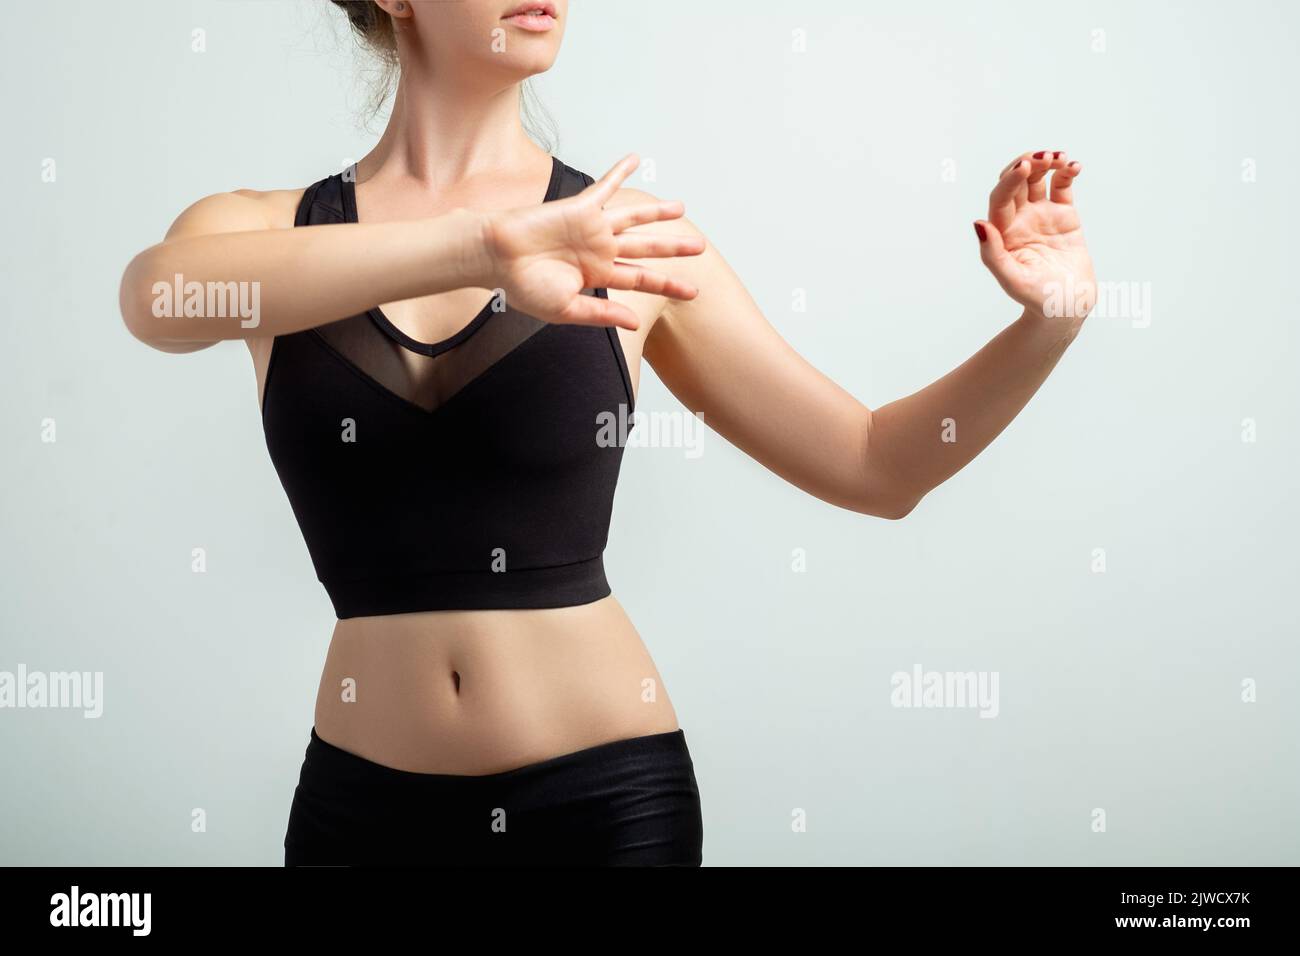 choreography class active lifestyle woman dancing Stock Photo